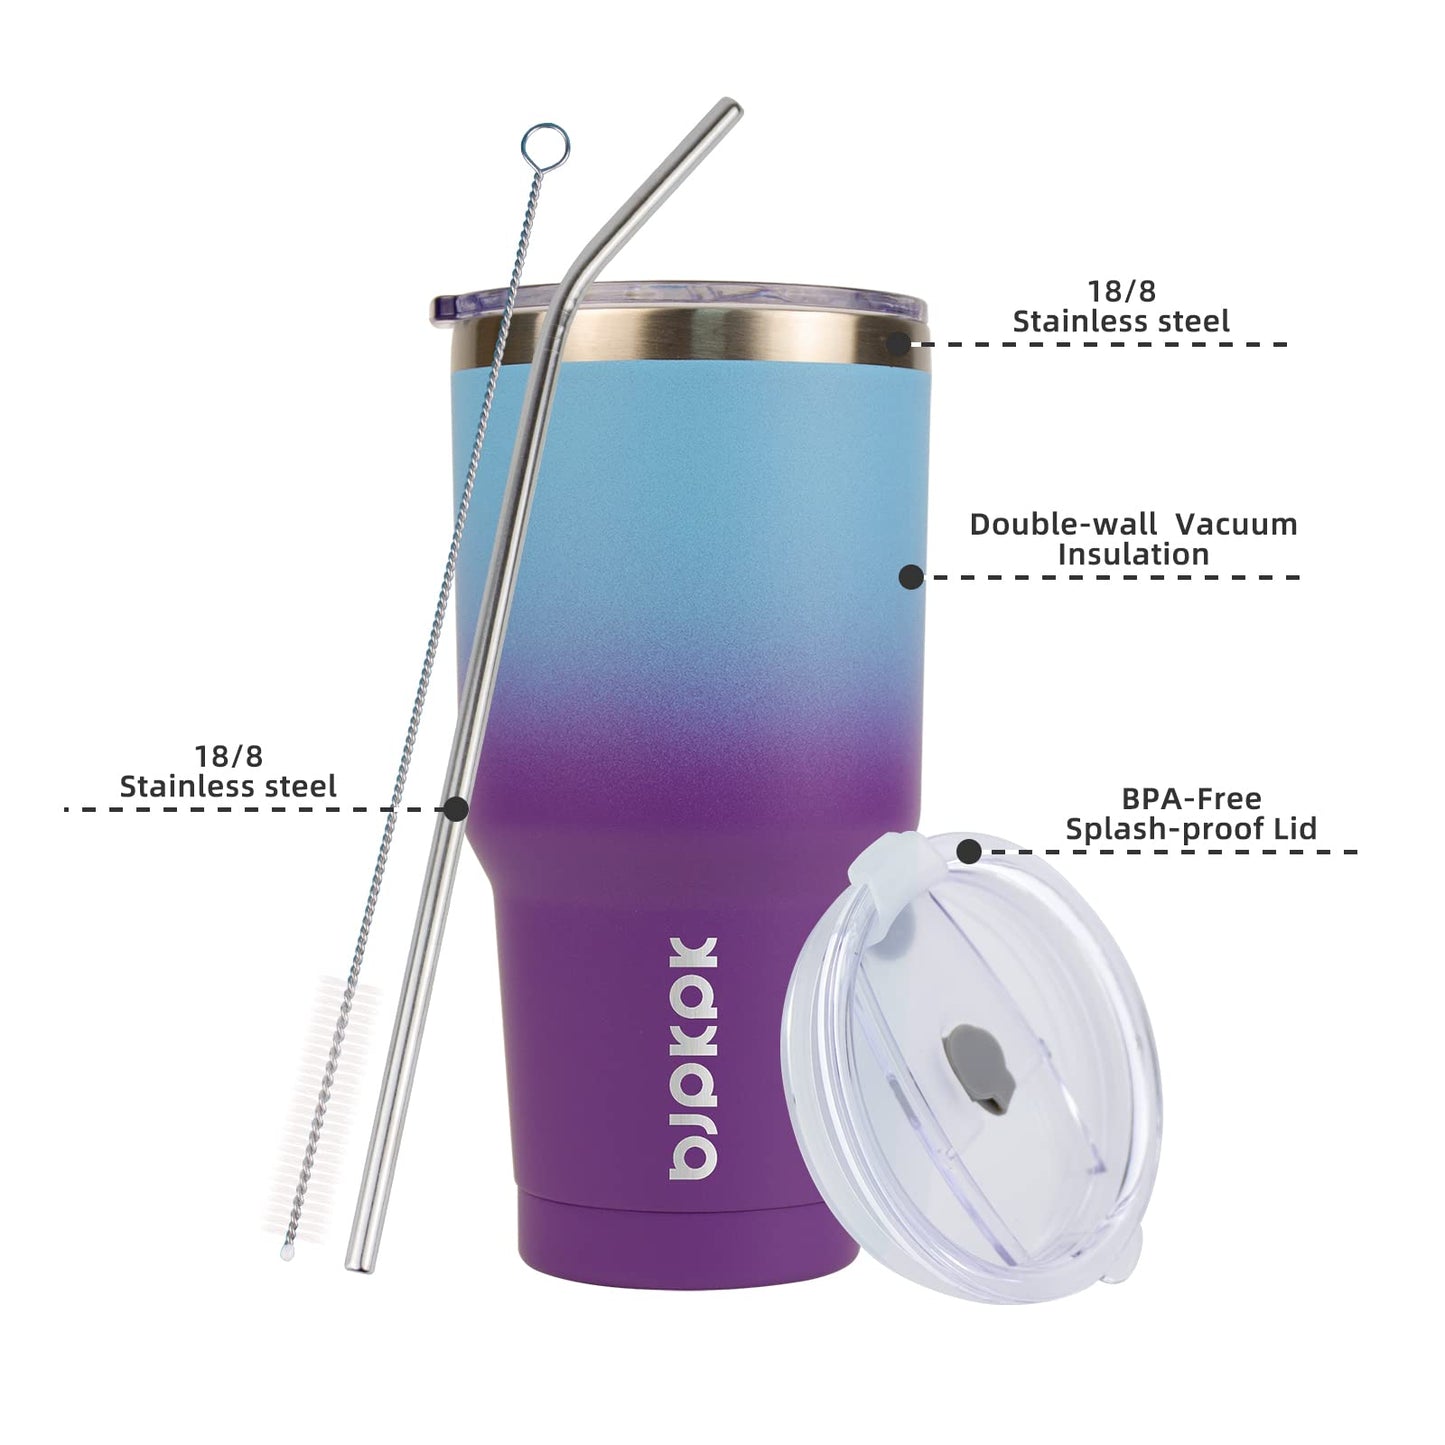 BJPKPK 30oz Color Block Tumbler With Lid And Straw,Stainless Steel Double Wall Vacuum Insulated Tumblers,Ocean Dream